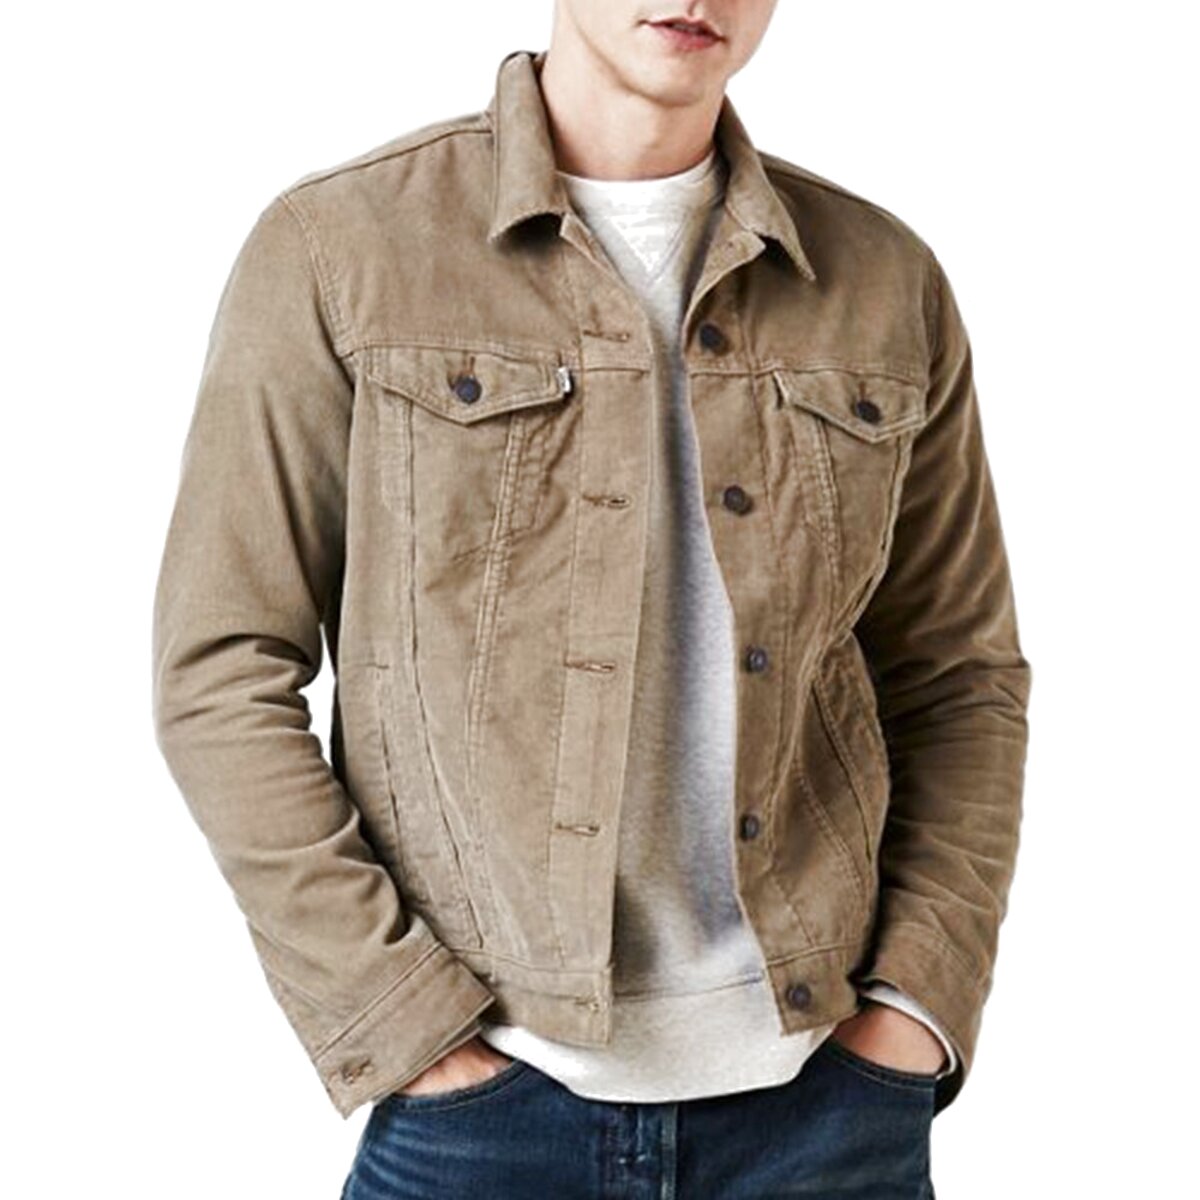 Levis Cord Jacket for sale in UK | View 25 bargains